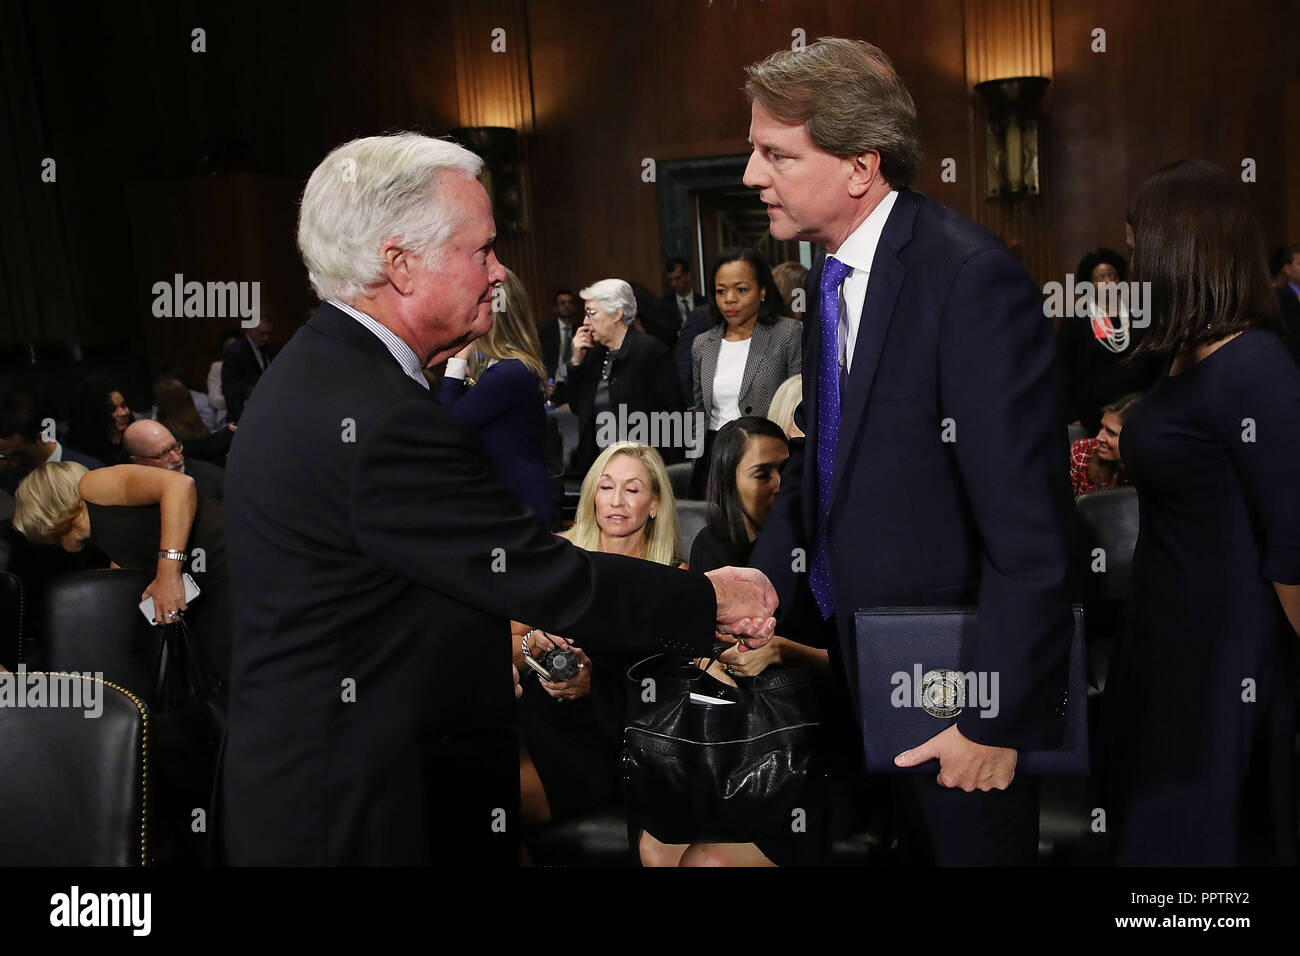 WASHINGTON, DC - SEPTEMBER 27: Judge Brett Kavanaugh's father Everett Kavanaugh (L) shakes hands with White House Counsel Don McGahn at the conclusion of Supreme Court nominee Judge Brett Kavanaugh's confirmation hearing before the Senate Judiciary Committee in the Dirksen Senate Office Building on Capitol Hill September 27, 2018 in Washington, DC. Kavanaugh was called back to testify about claims by Christine Blasey Ford, who has accused him of sexually assaulting her during a party in 1982 when they were high school students in suburban Maryland. (Photo by Win McNamee/Getty Images) | usage Stock Photo